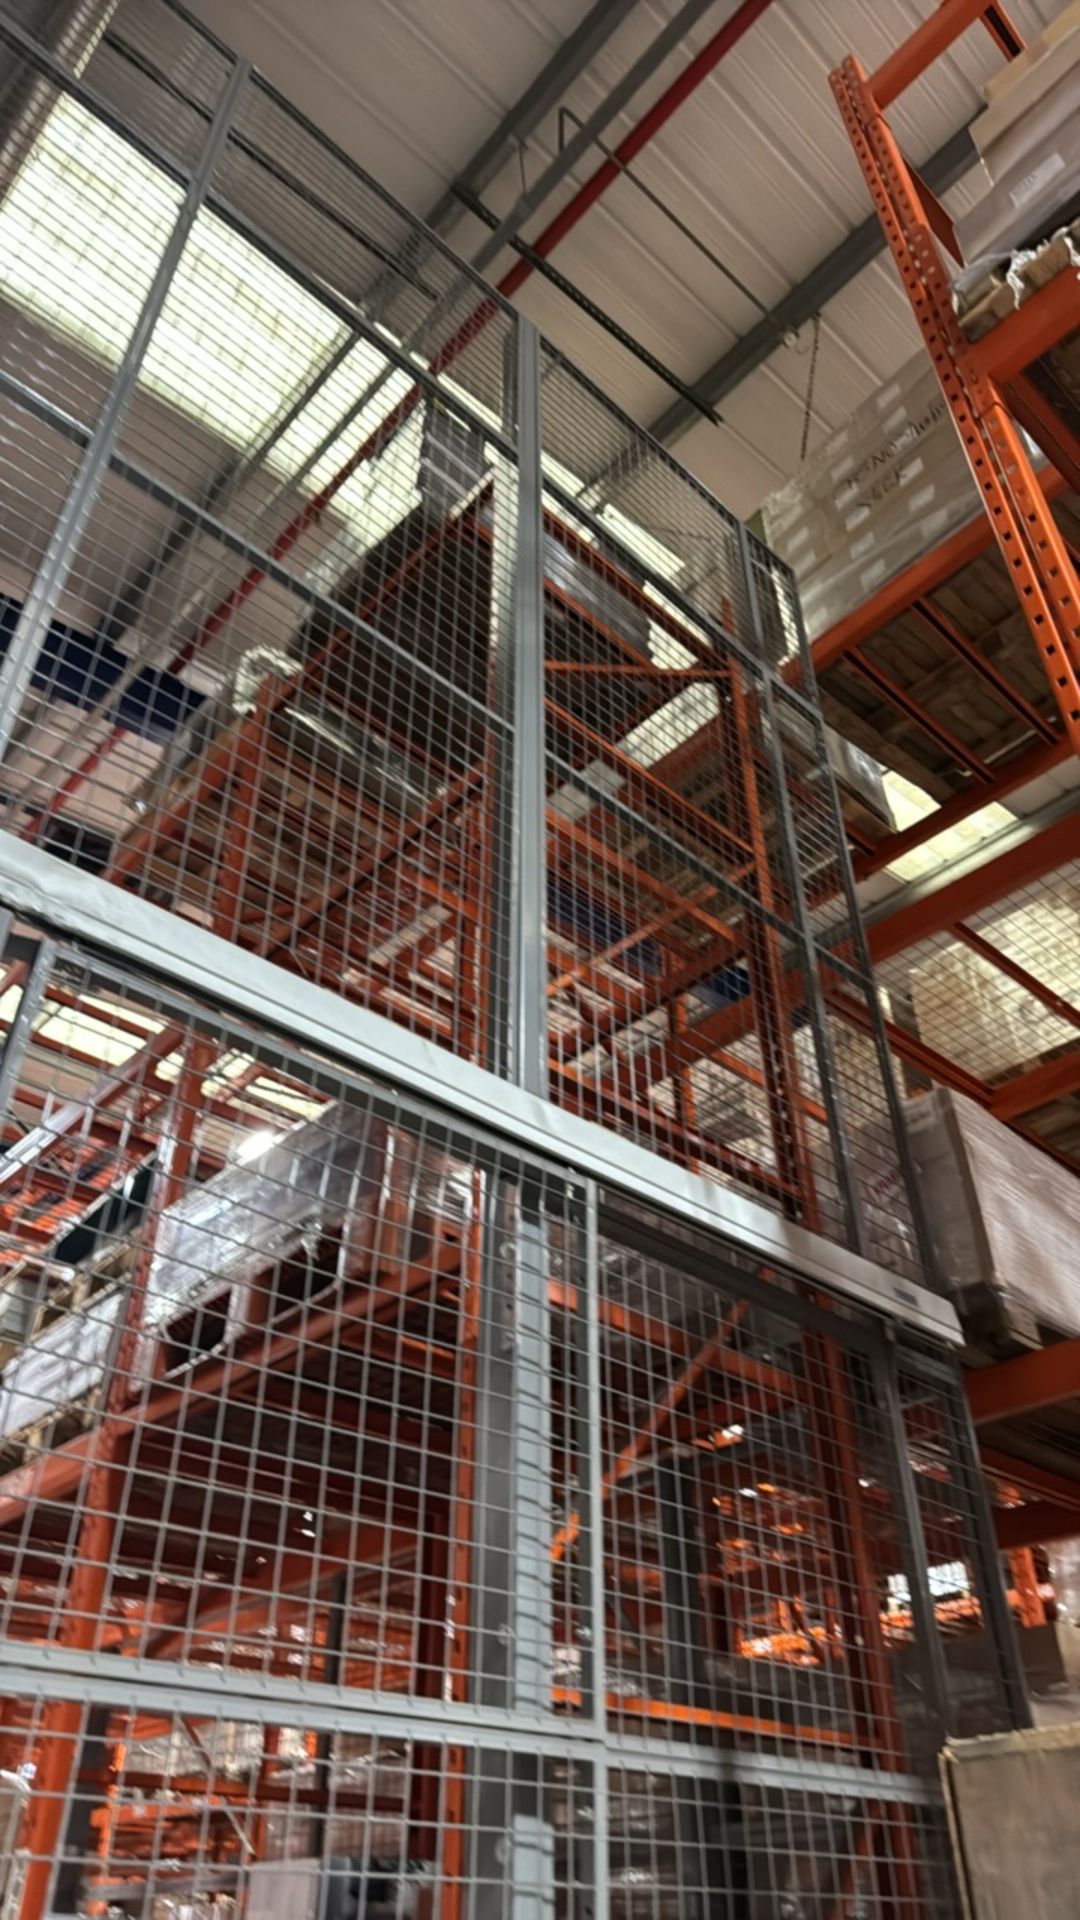 Metal Cage Wall - Image 4 of 6